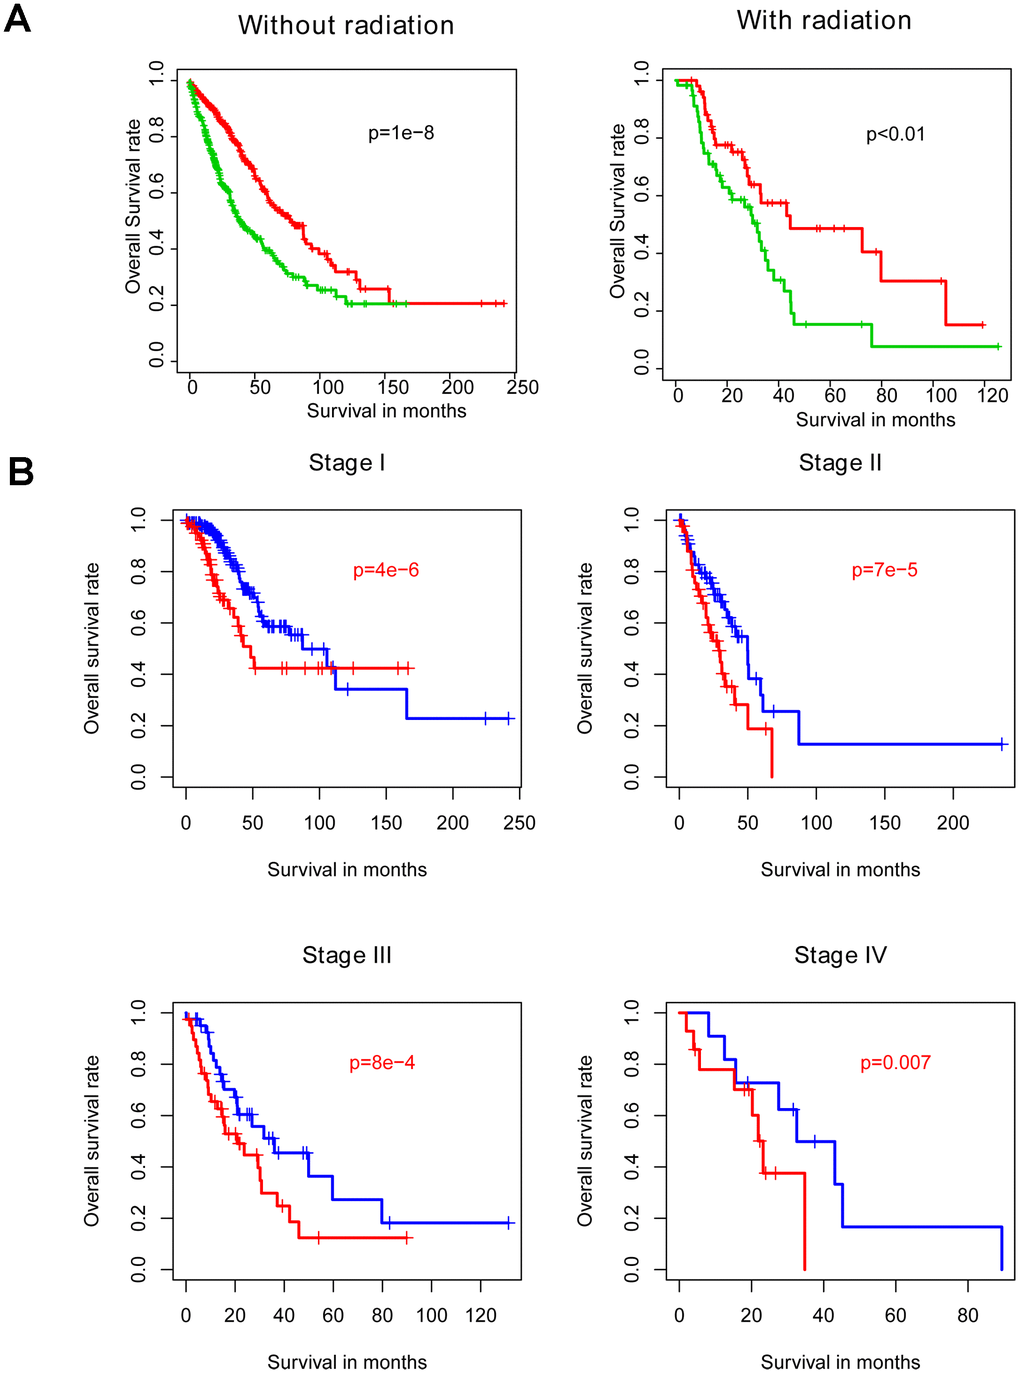 Within-subgroup prognostic value of the risk score, for radiotherapy-treated and –untreated (A) samples, as well as for samples stratified by stage (B).